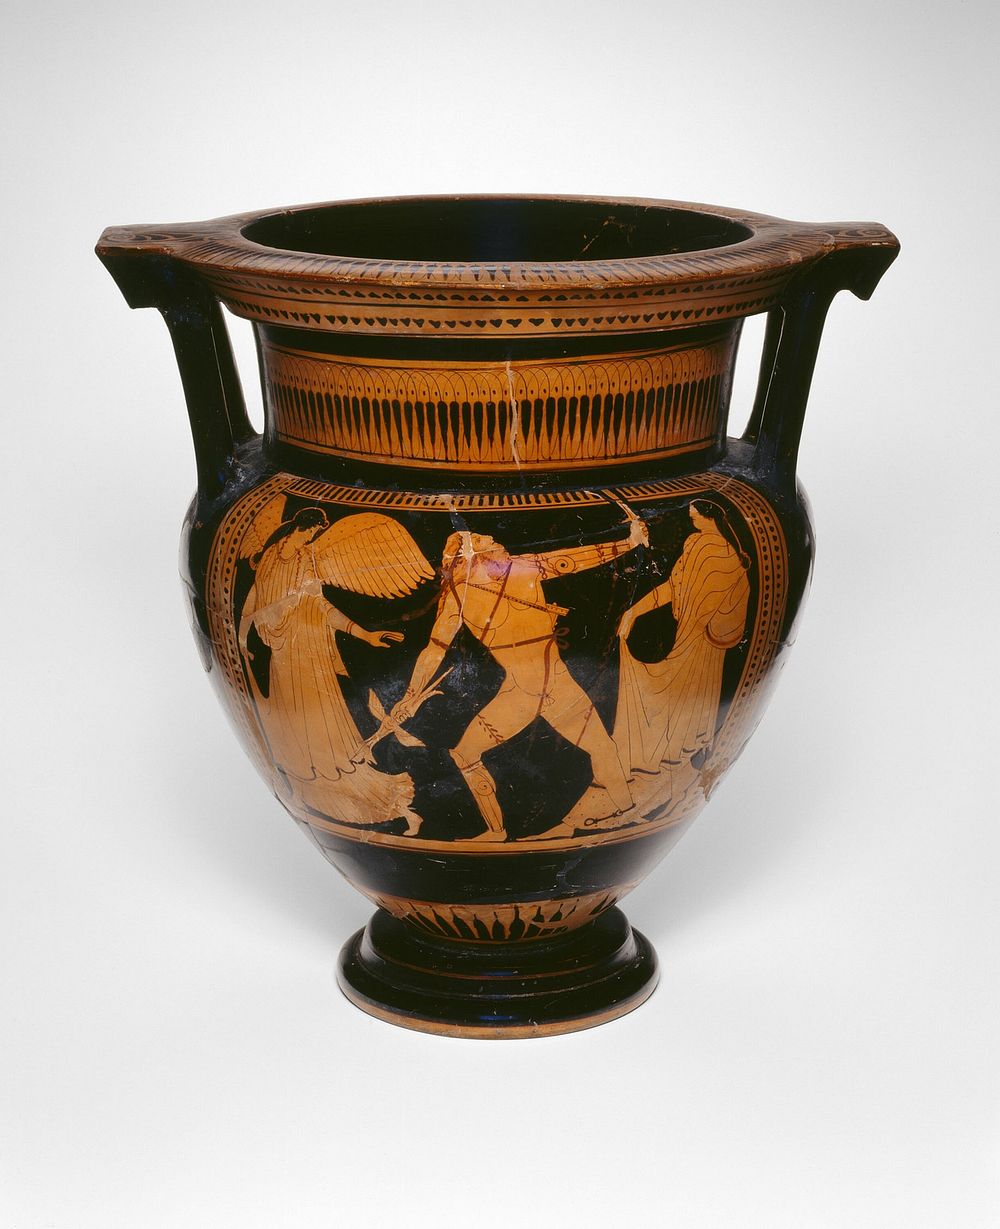 Column-Krater (Mixing Bowl) by Ancient Greek